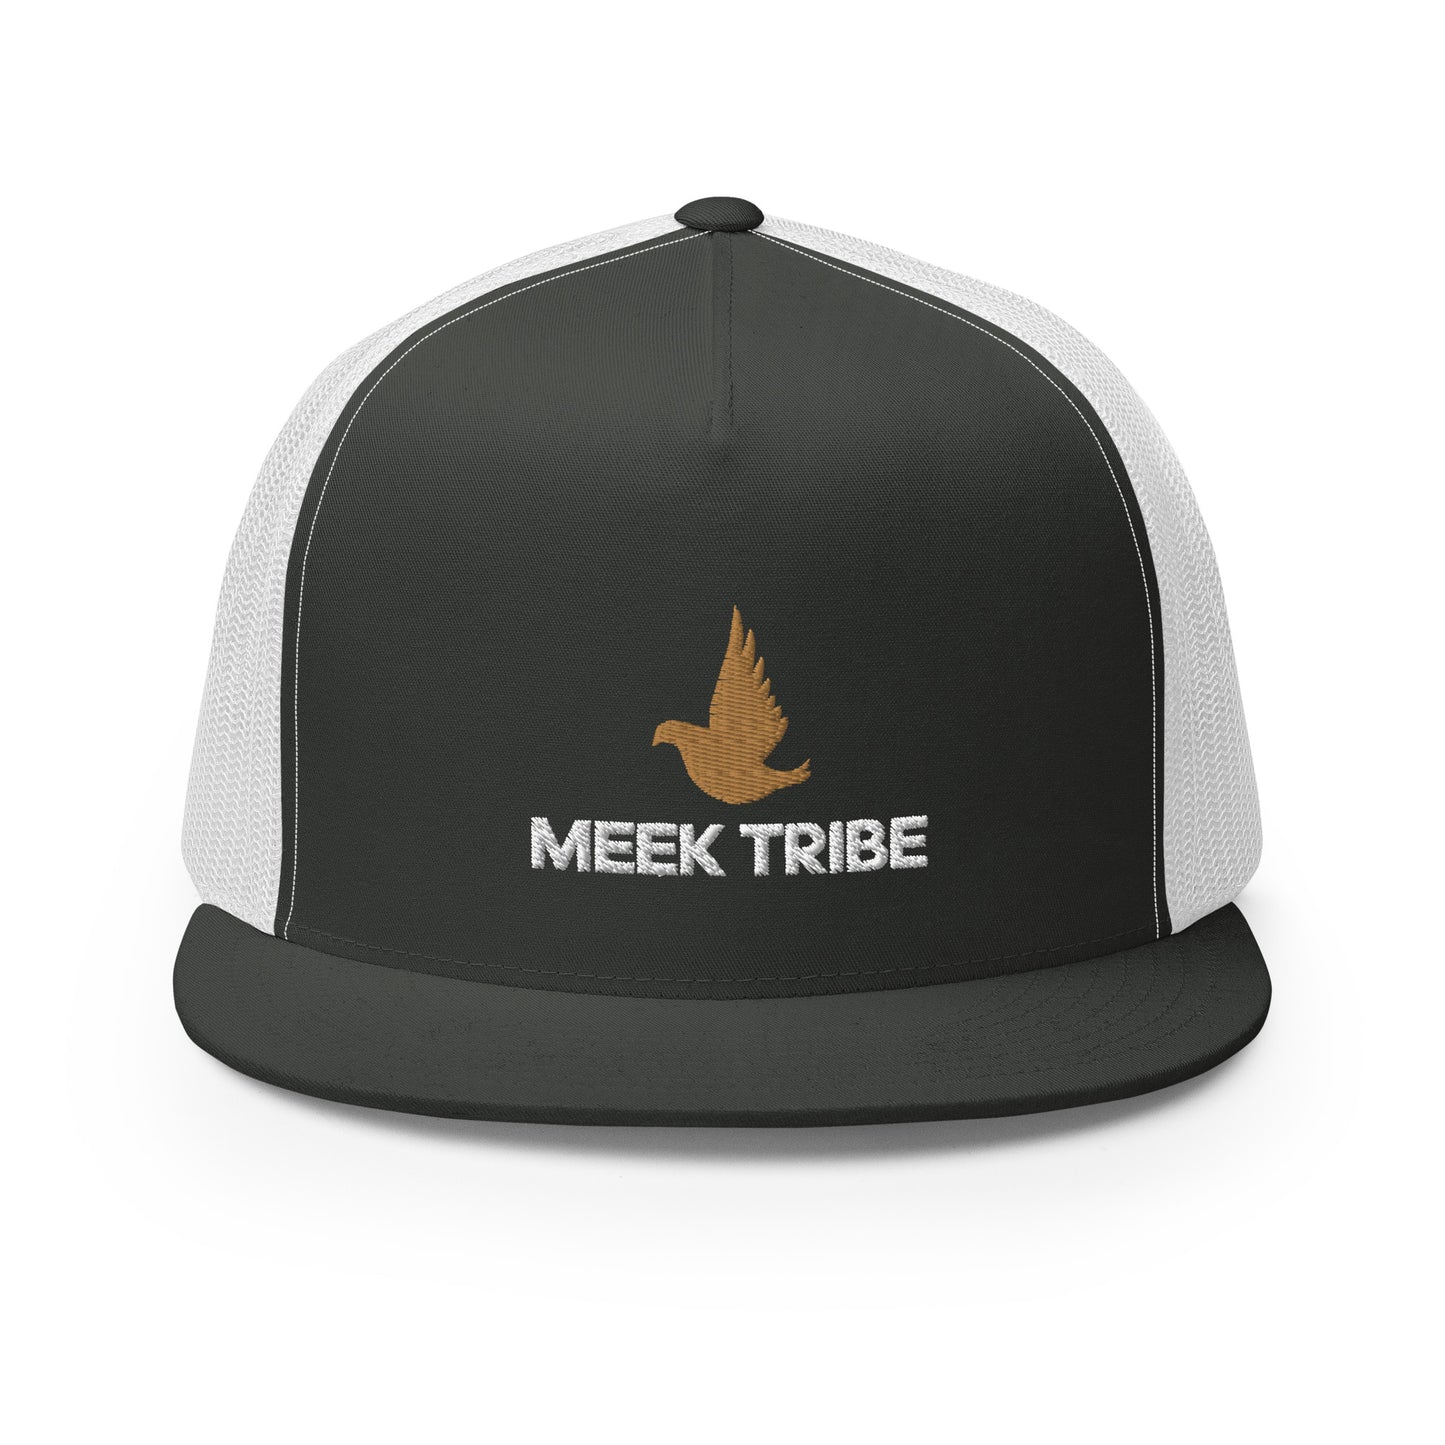 Meek Tribe "Touch of Gold" Trucker Snap Back